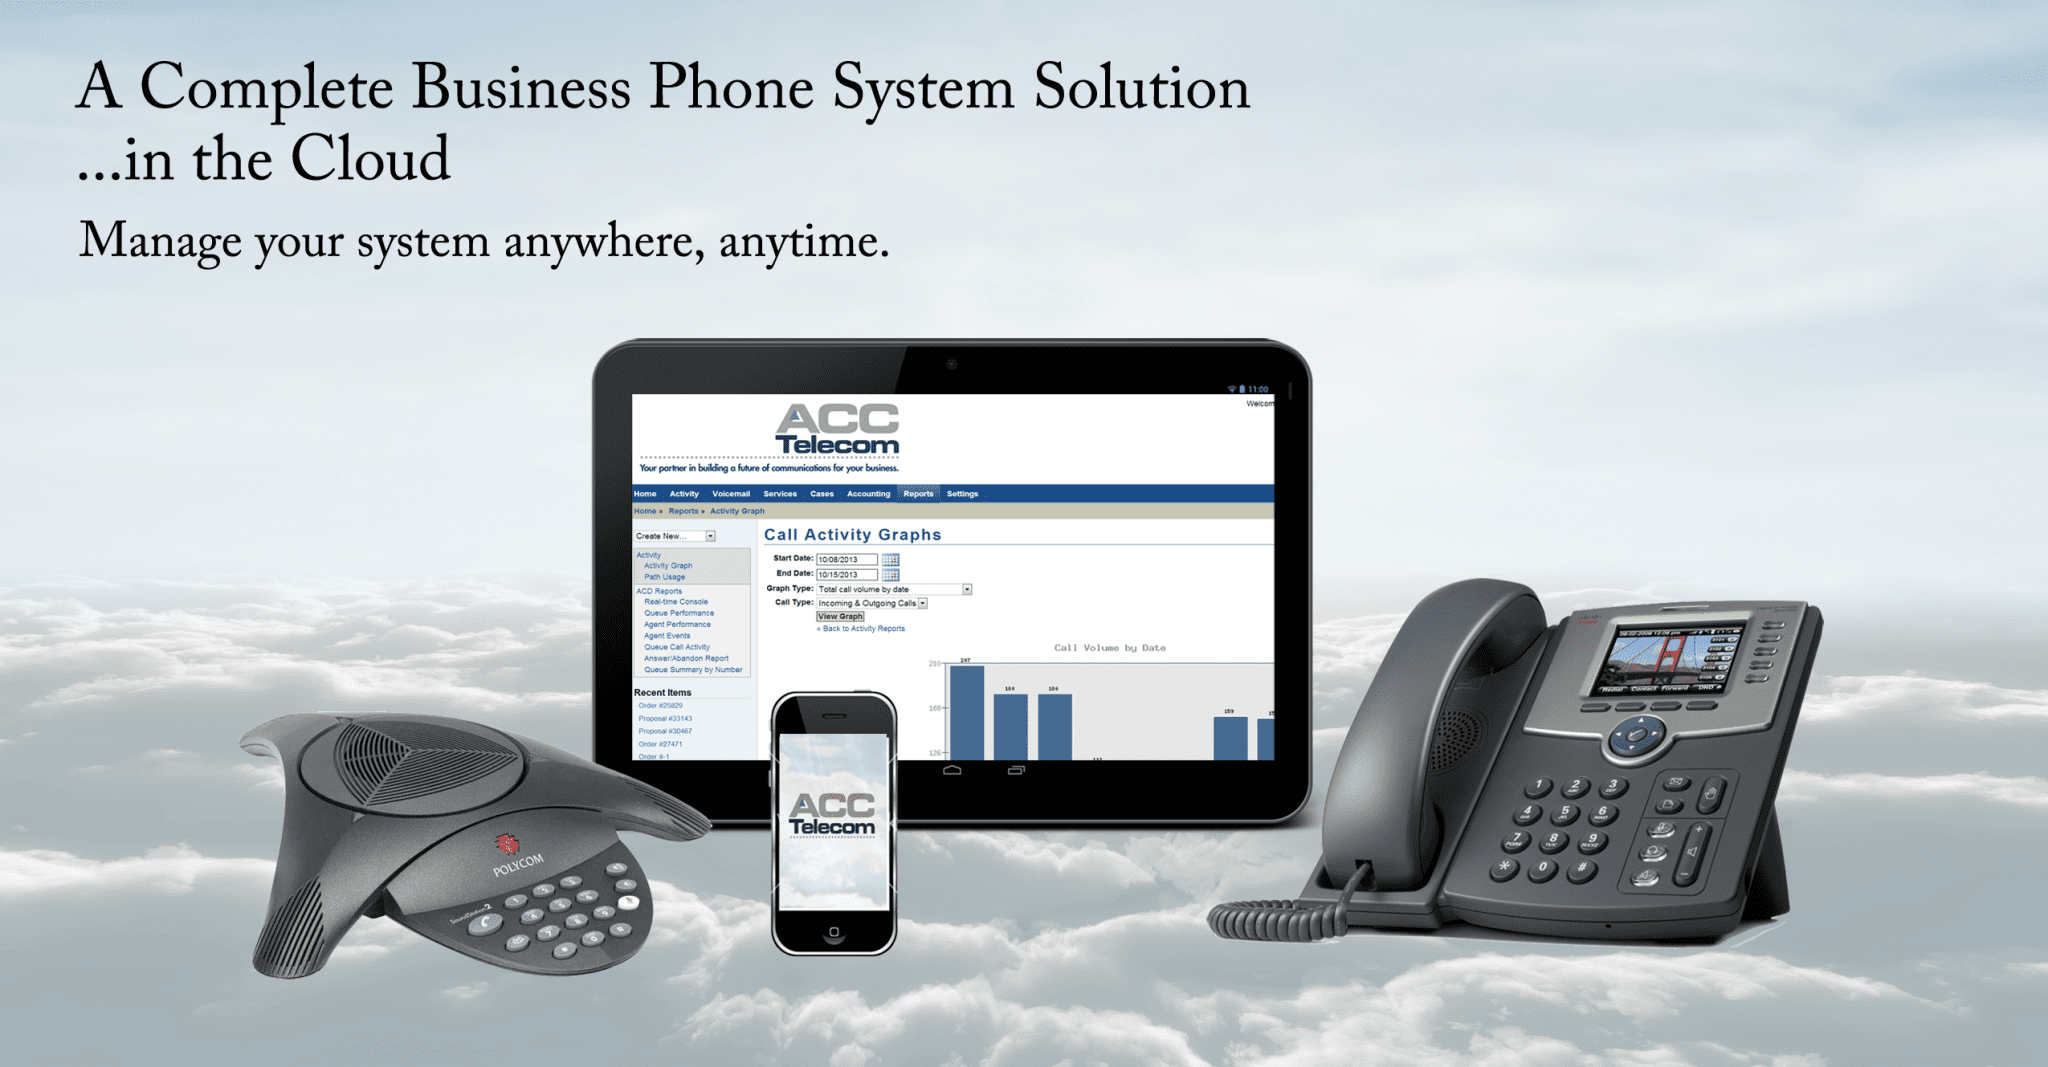 New Hosted Cloud Phone System Features and Applications